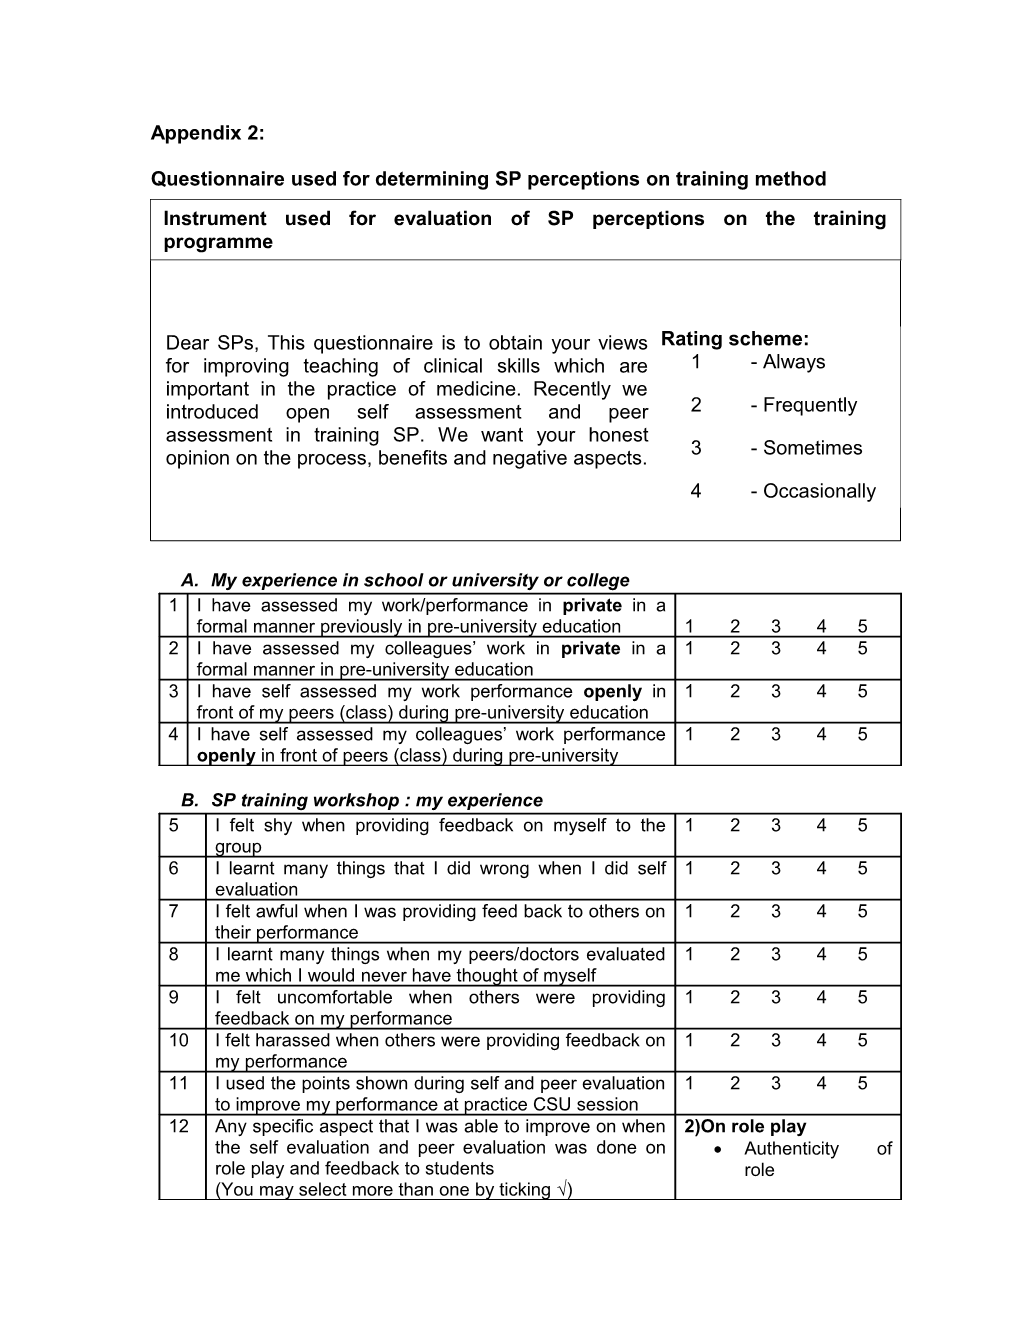 Questionnaire Used for Determining SP Perceptions on Training Method